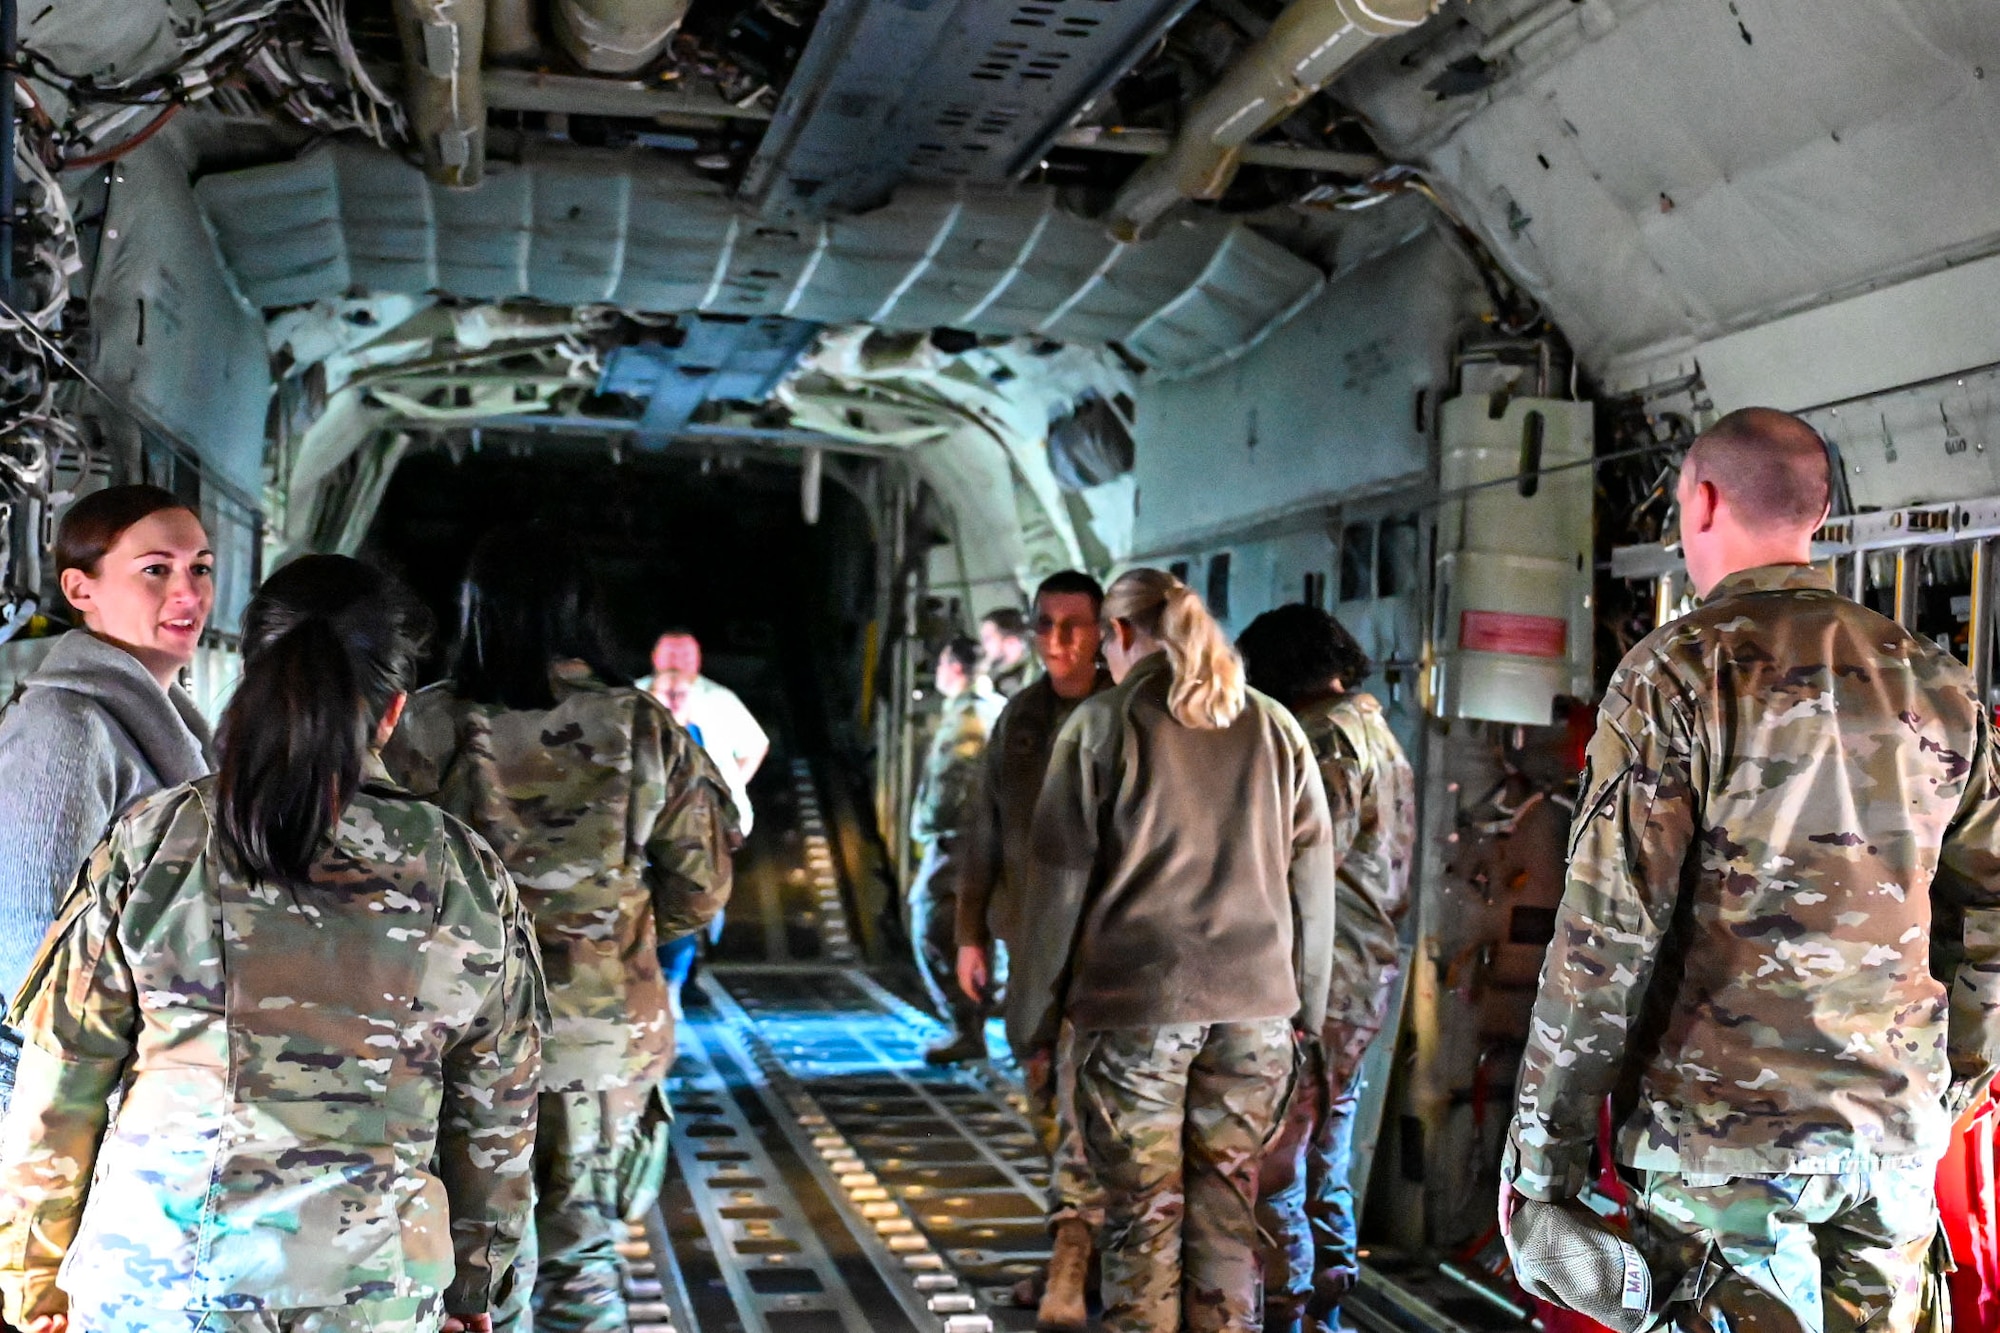 U.S. Airmen and providers stand in a C-130J aircraft.